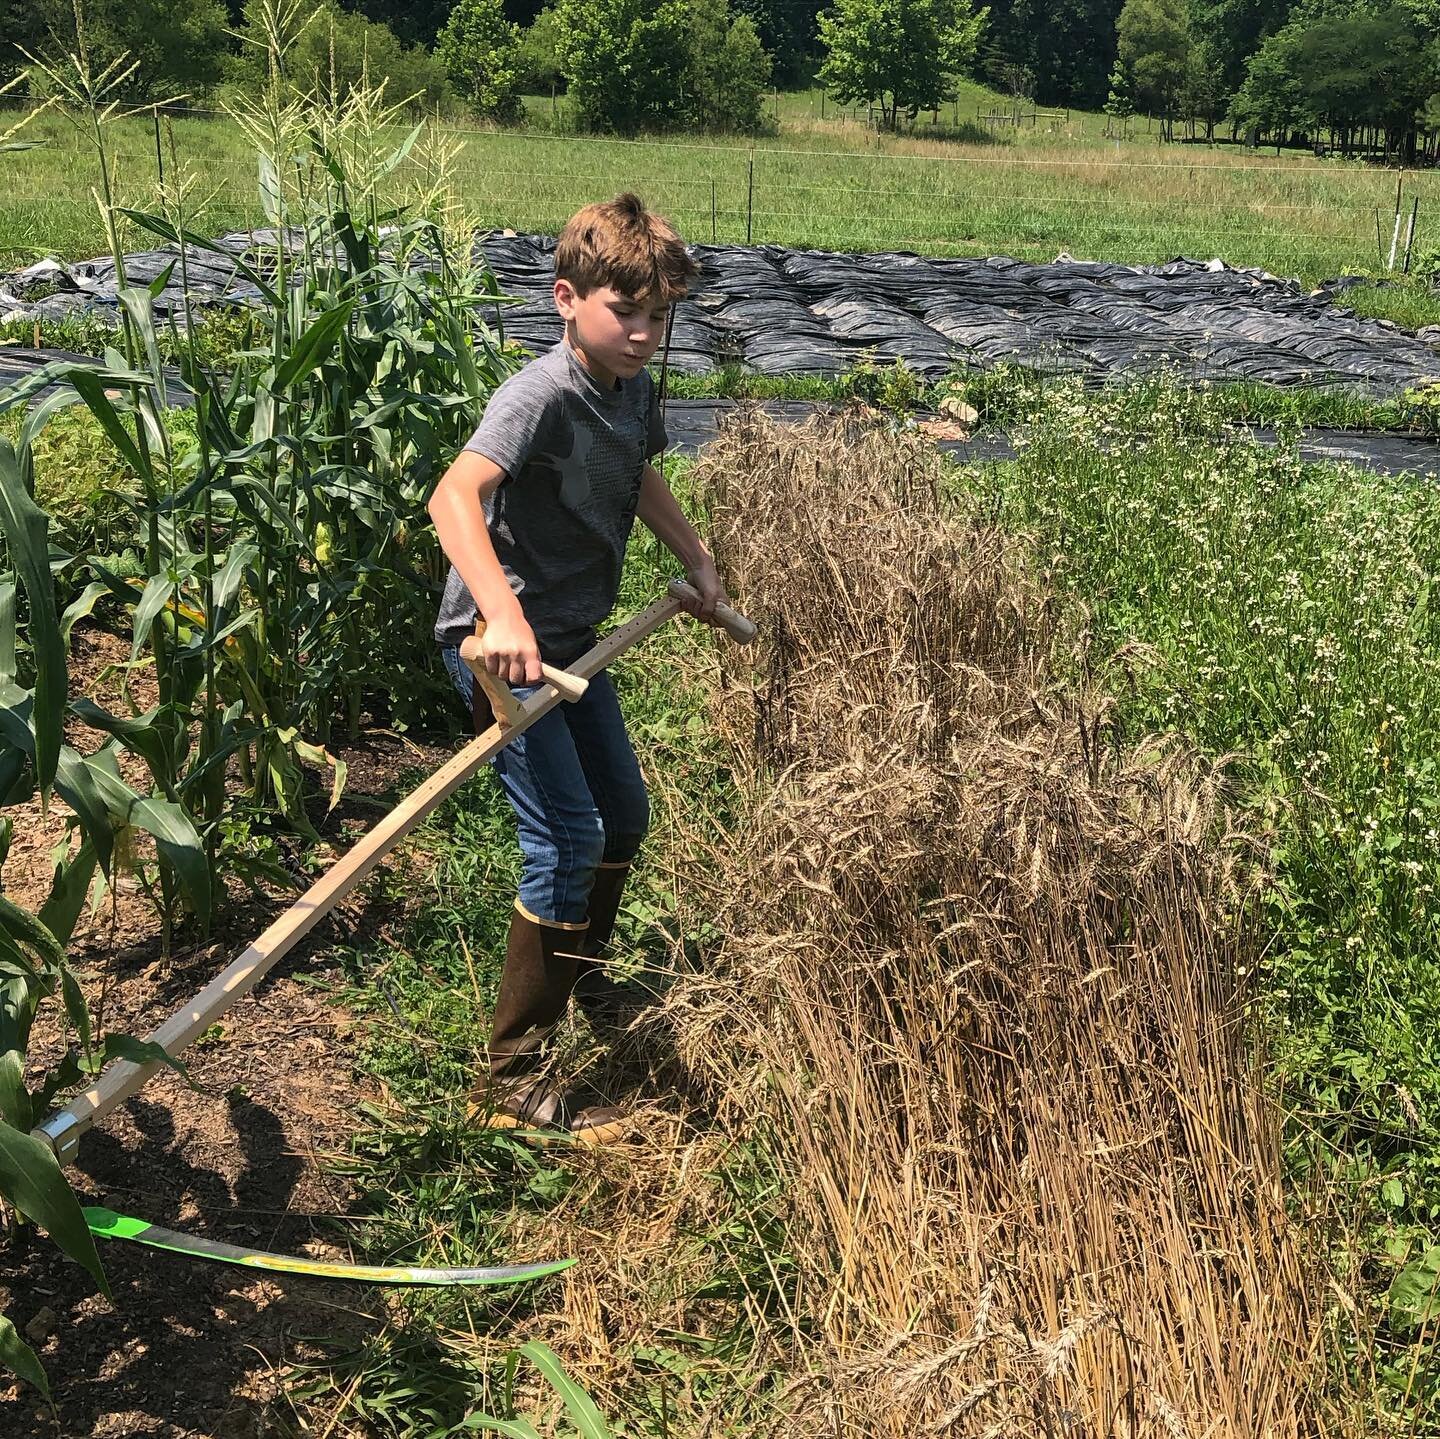 Wyatt harvesting Wheat and veggies on July 4th. The corn&rsquo;s more than knee high but I didn&rsquo;t plant enough. Succession planting of corn just hasn&rsquo;t worked that well for me the last two years. Seems better to plant all at once